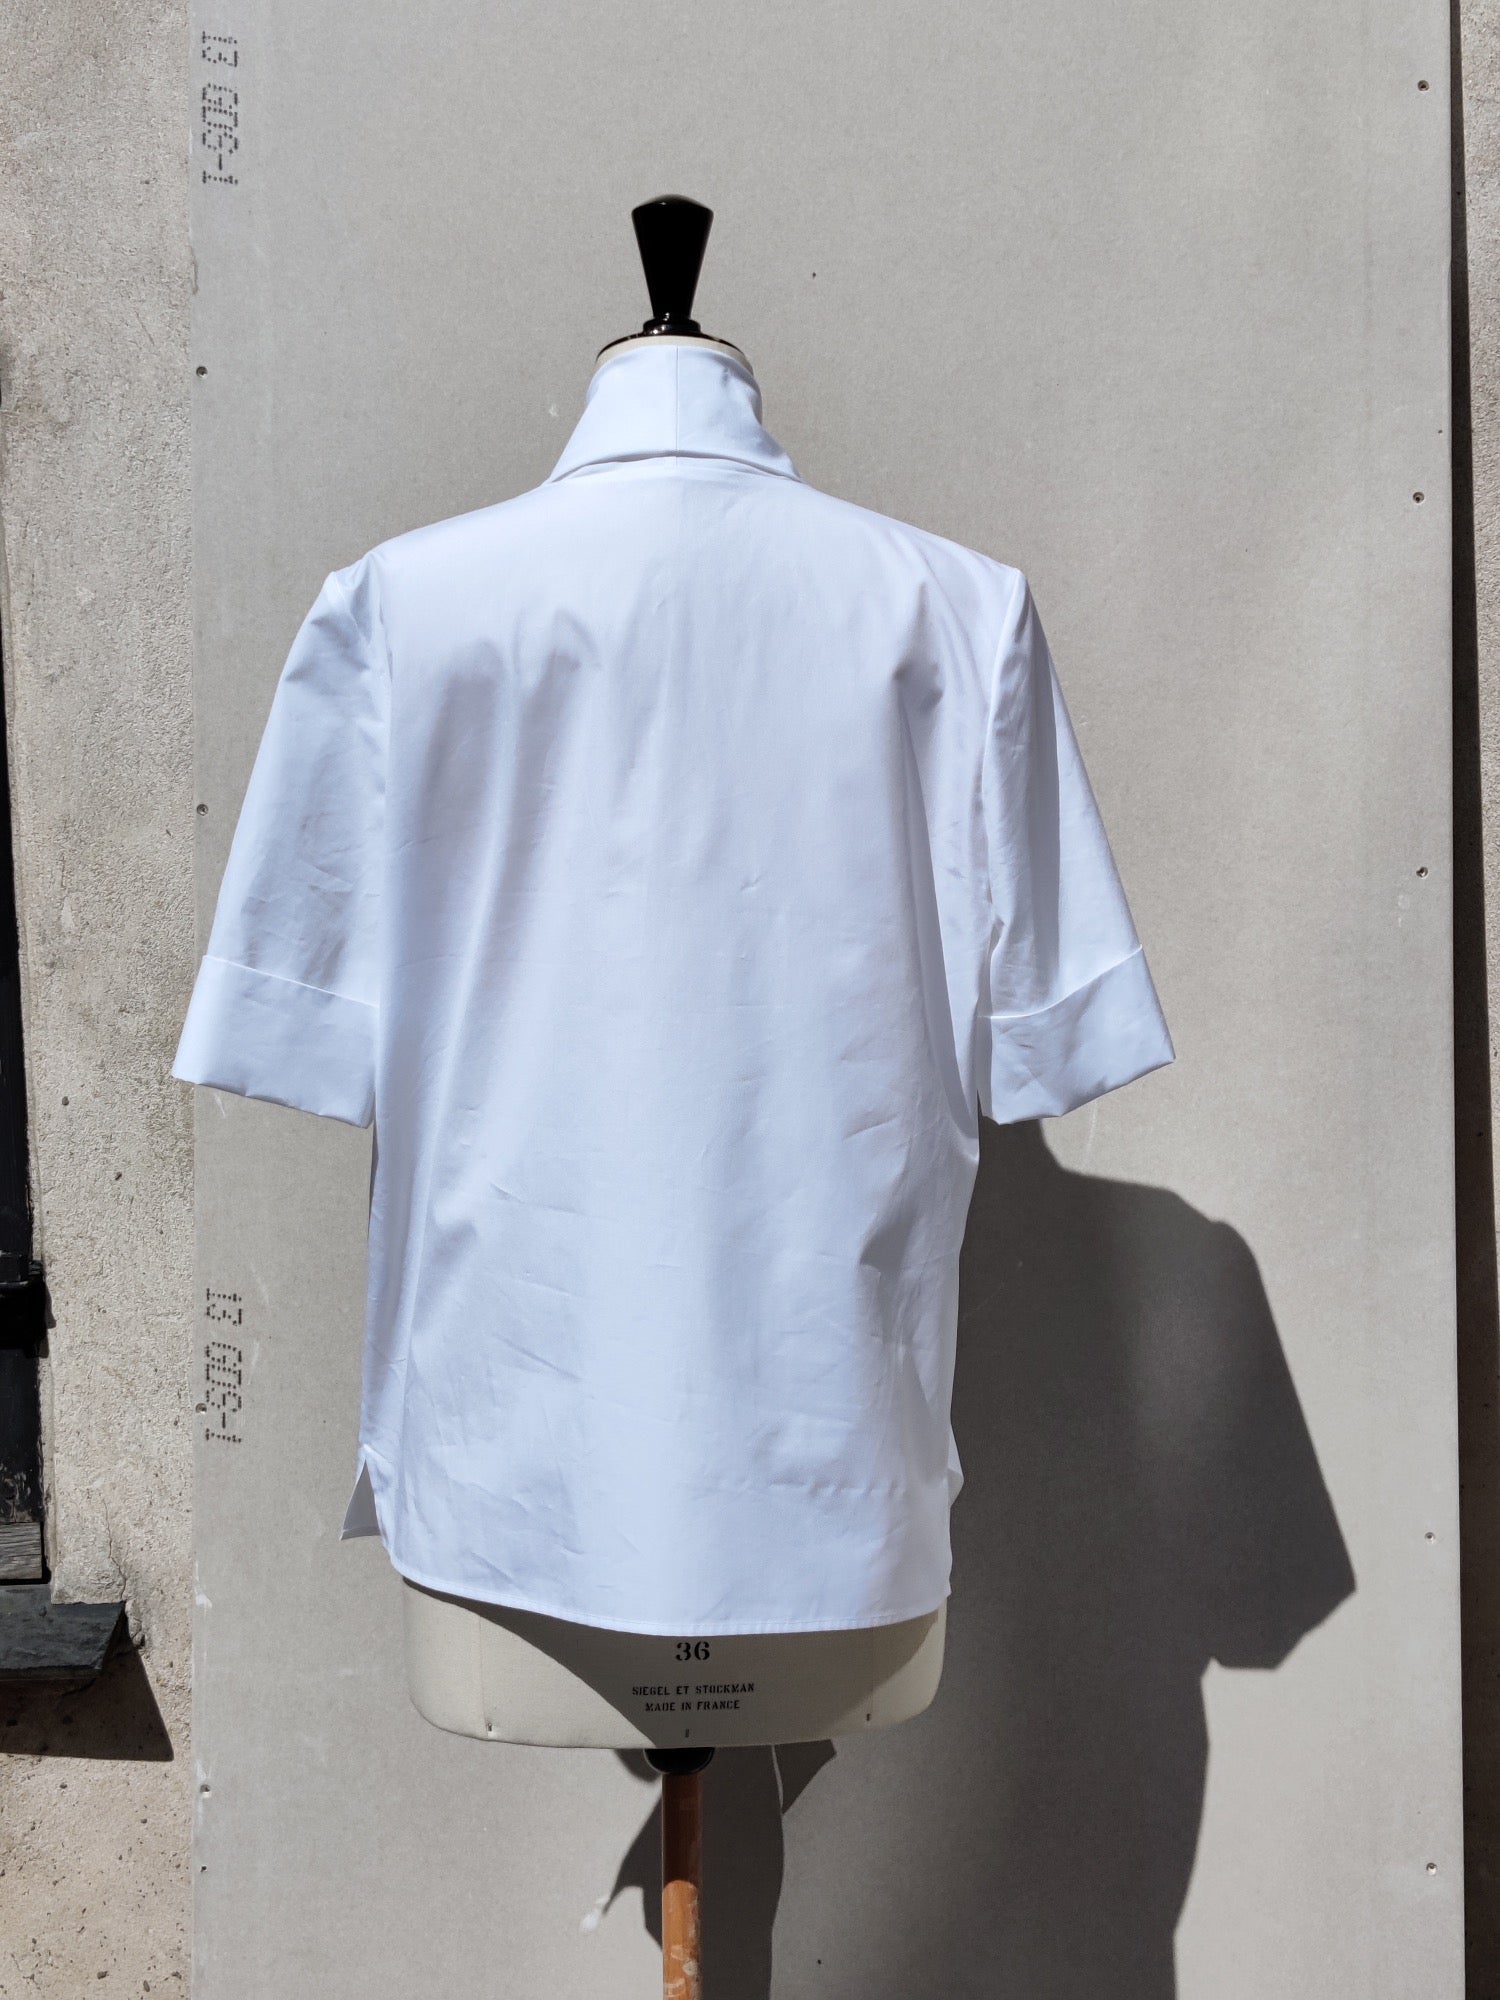 Back view. The Alan shirt is a short sleeved shirt with a pulled-up effect on the sleeves and is made in a soft feeling cotton.